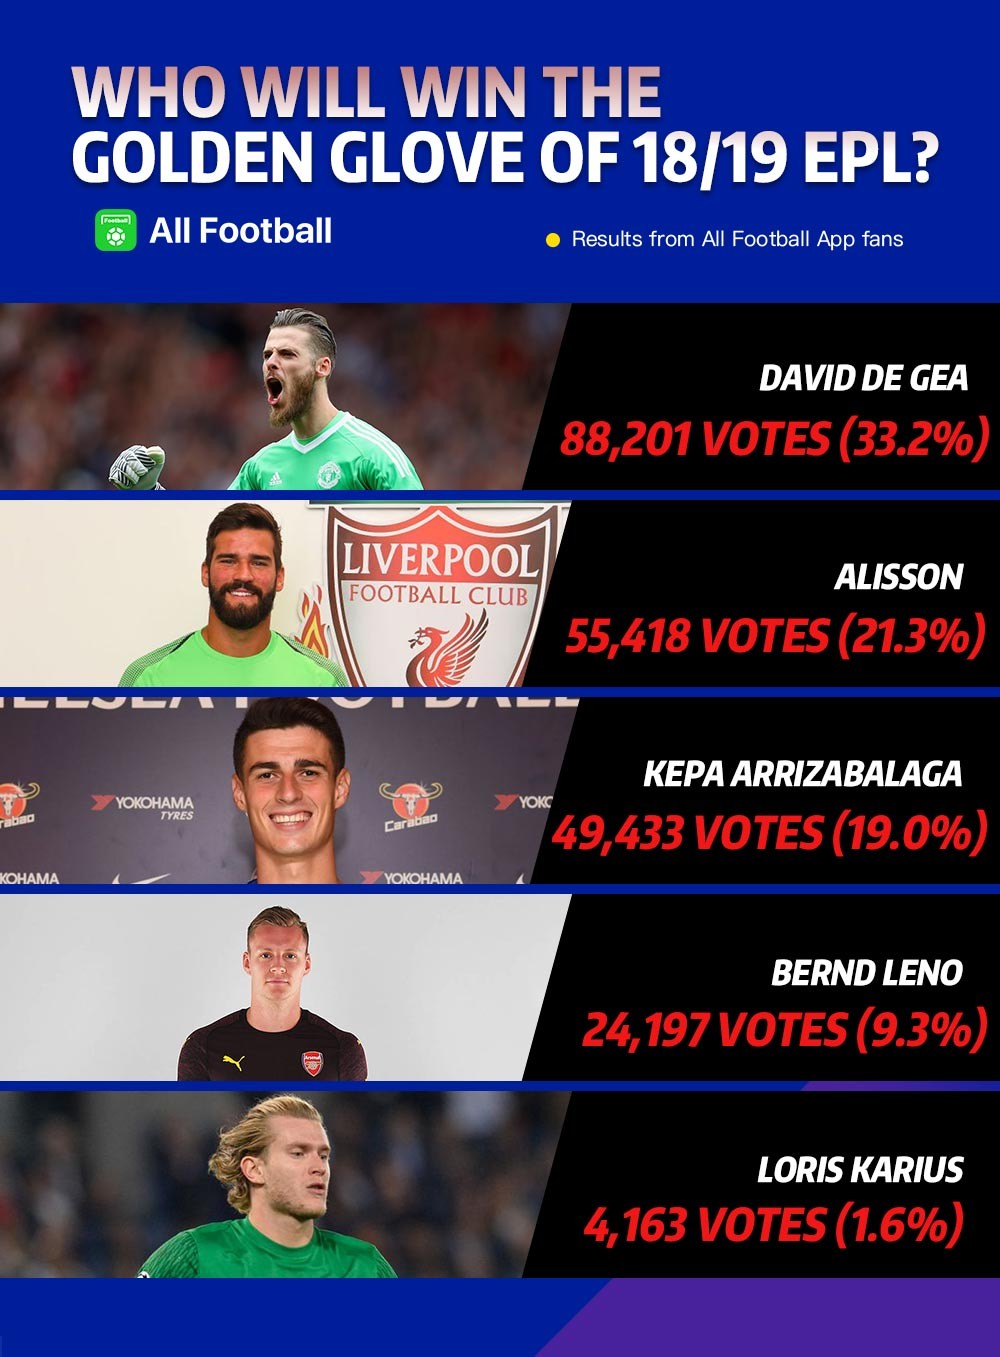 Who will win the EPL Golden Glove? David de Gea got the most votes from